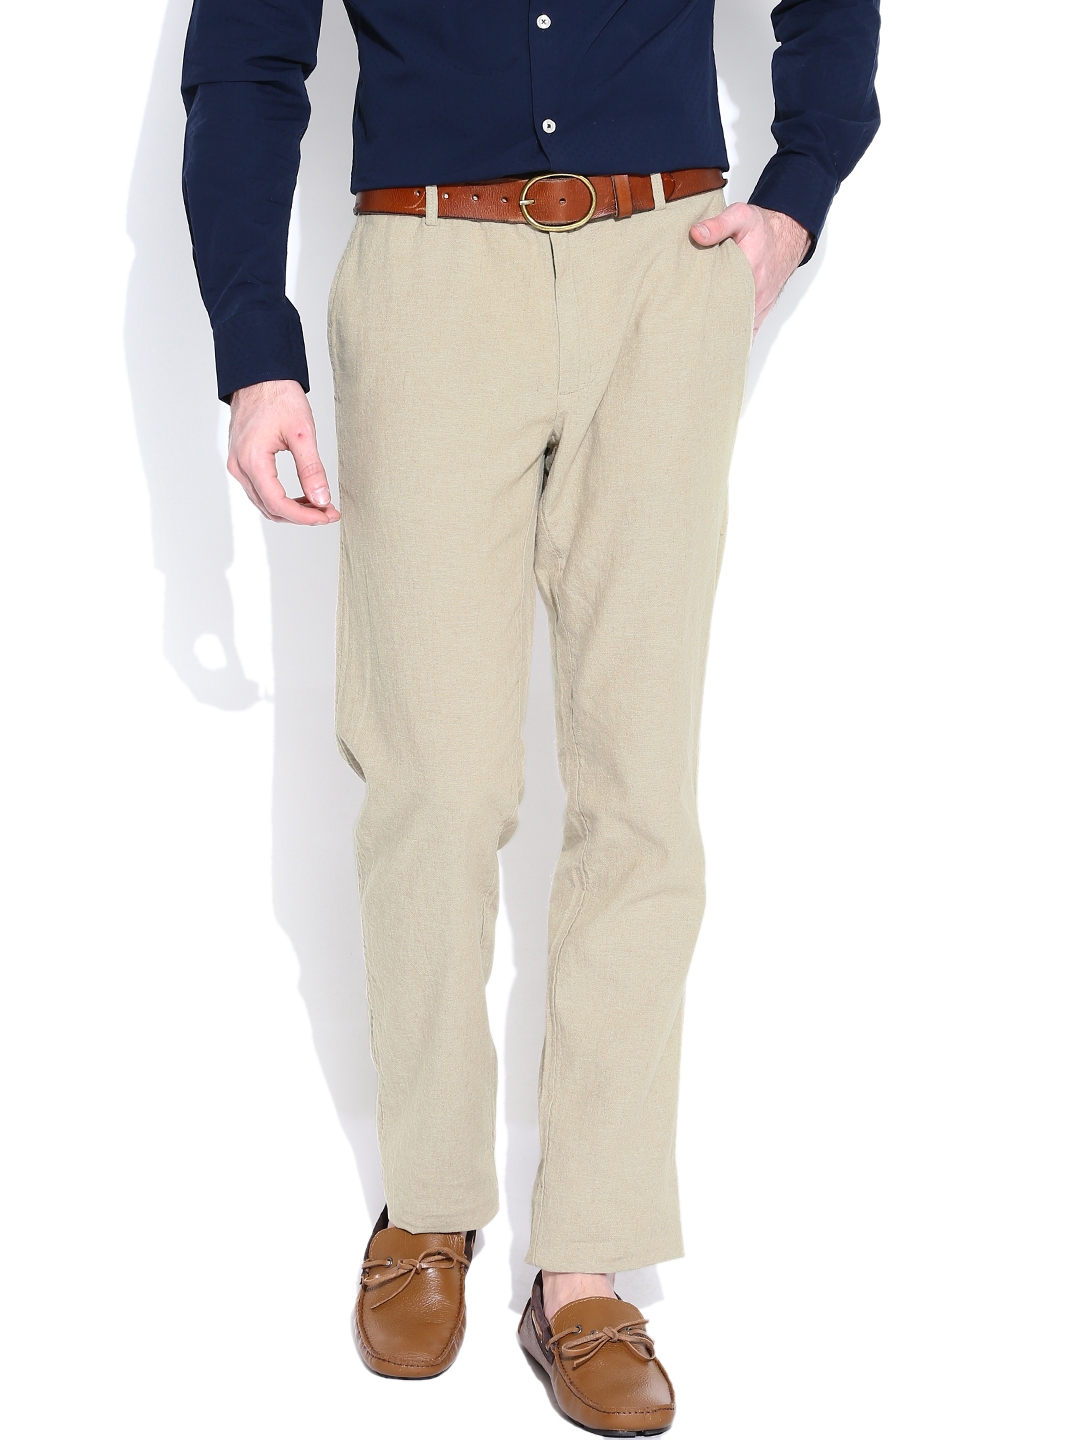 United colors of benetton grey trousers  Buy United colors of benetton  grey trousers online in India